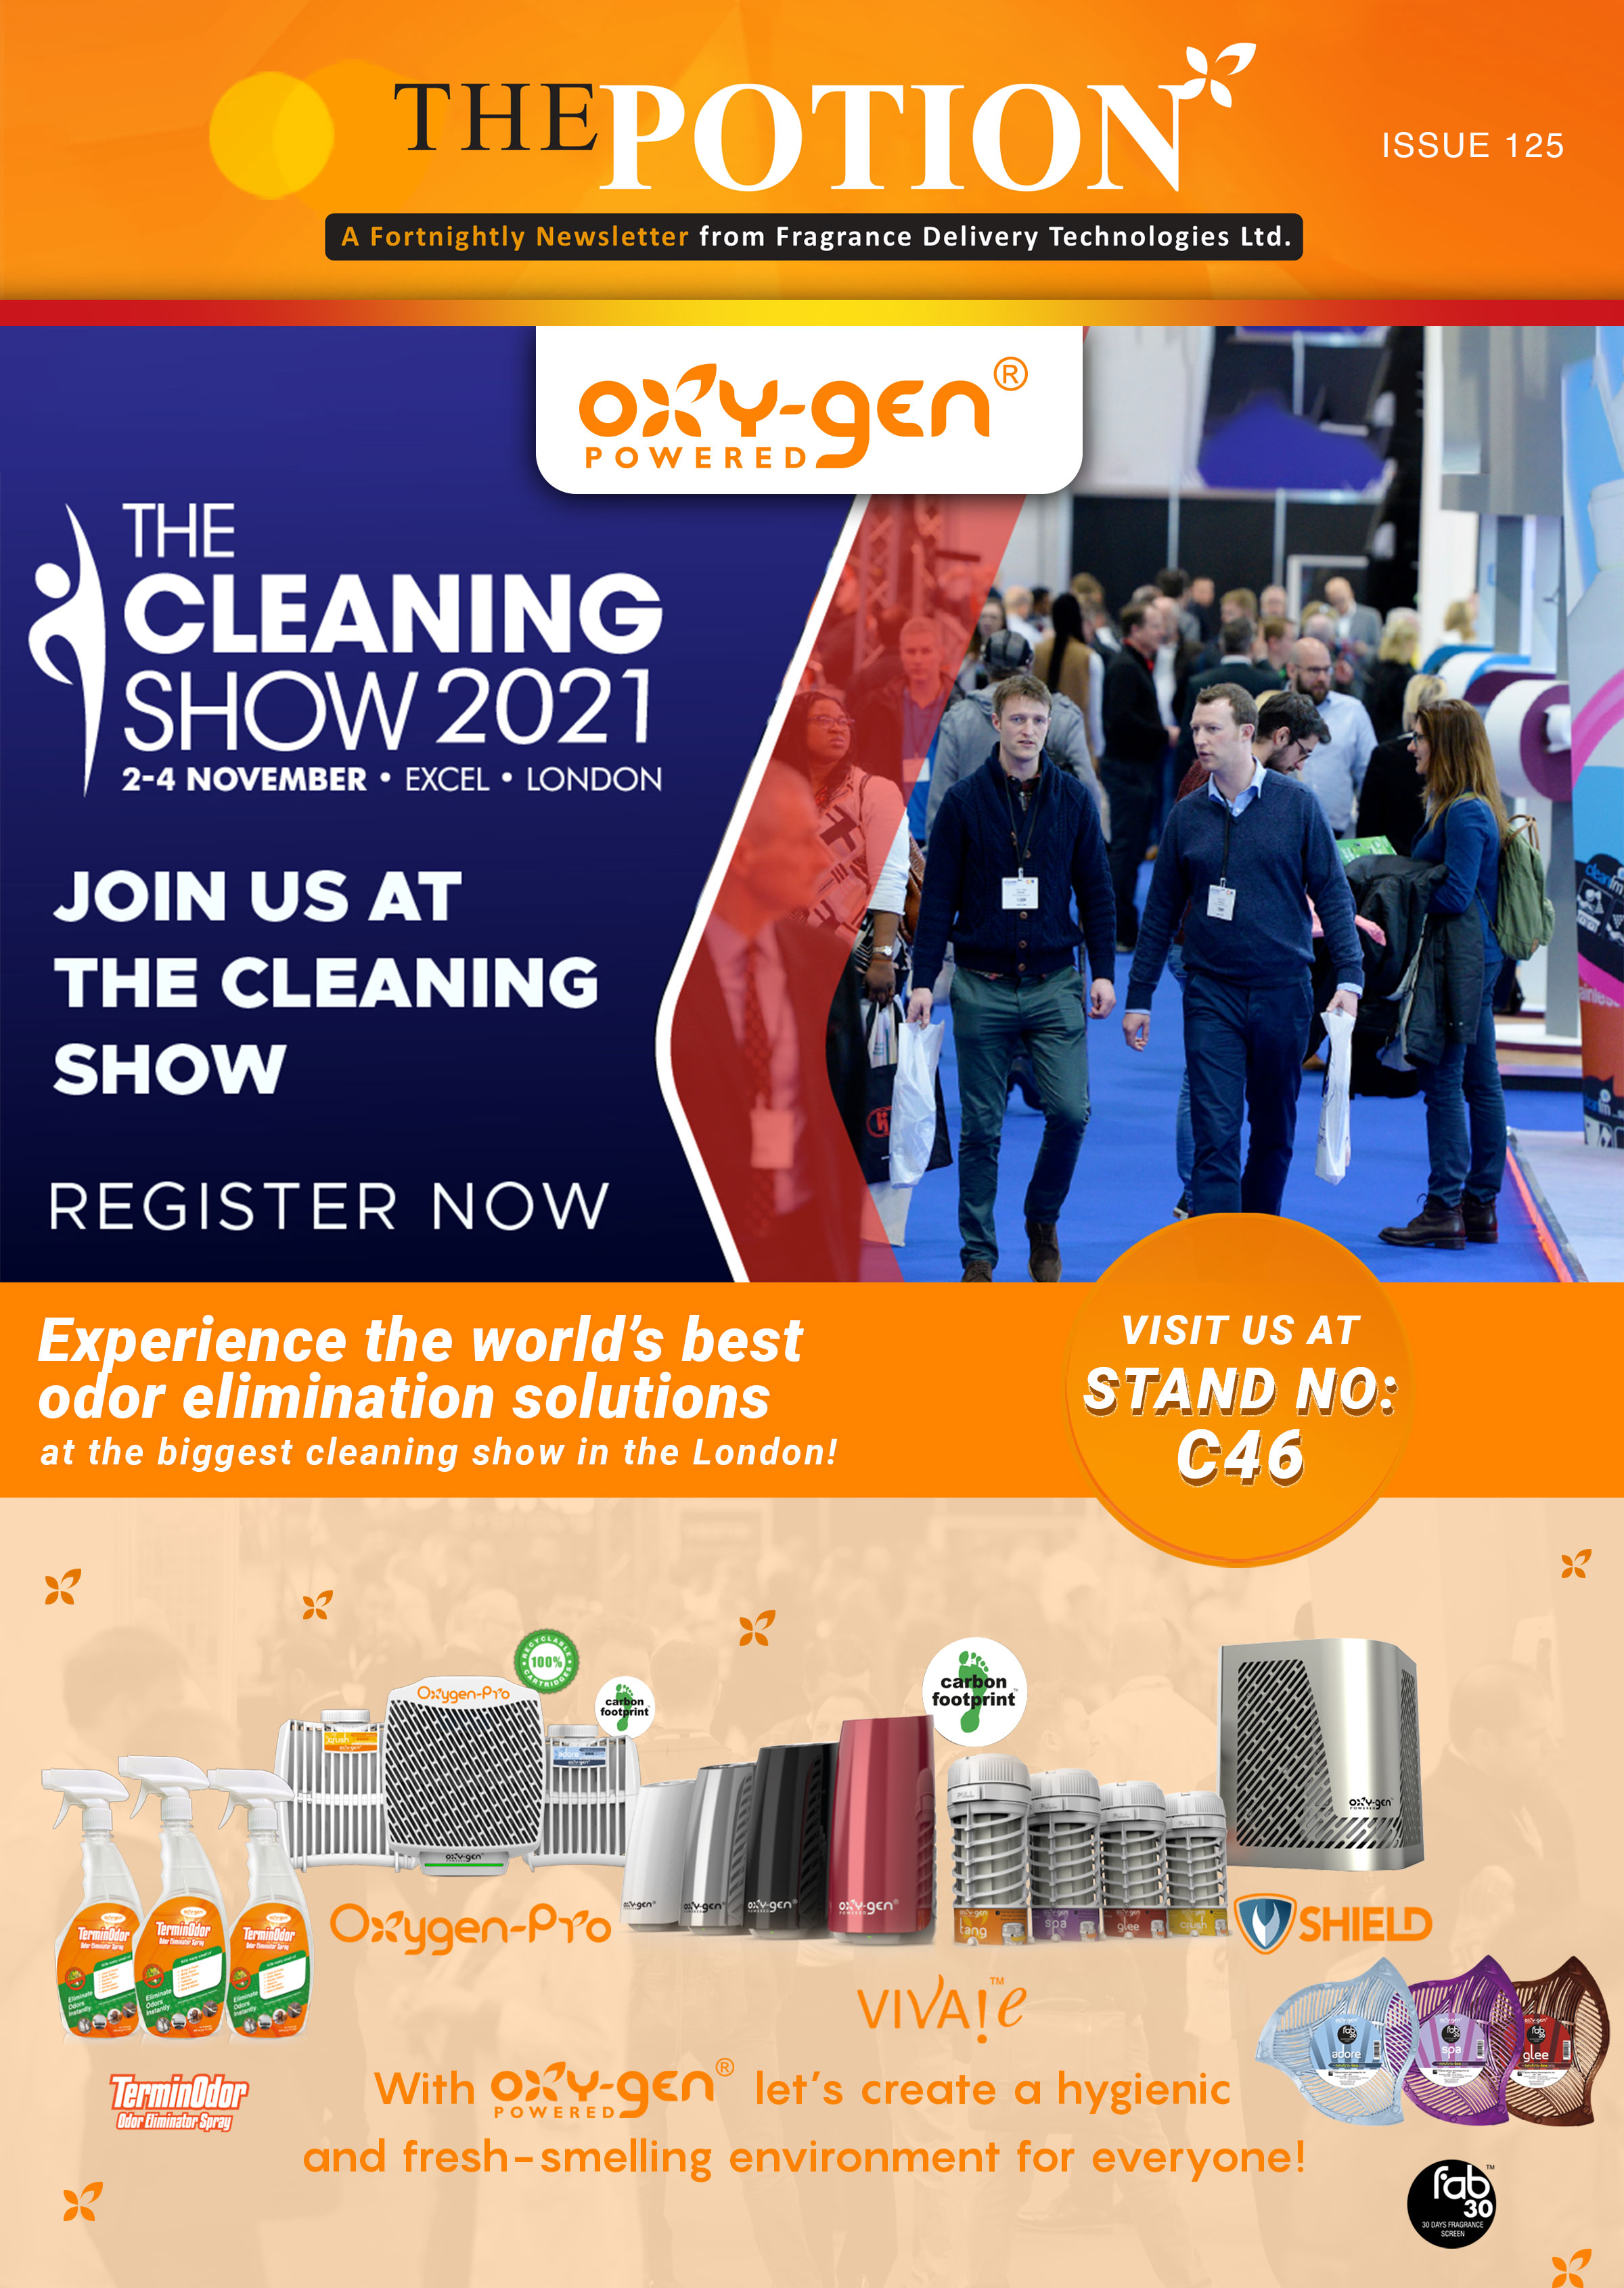 Visit Oxy-Gen Powered at the Cleaning Show - The Potion 125